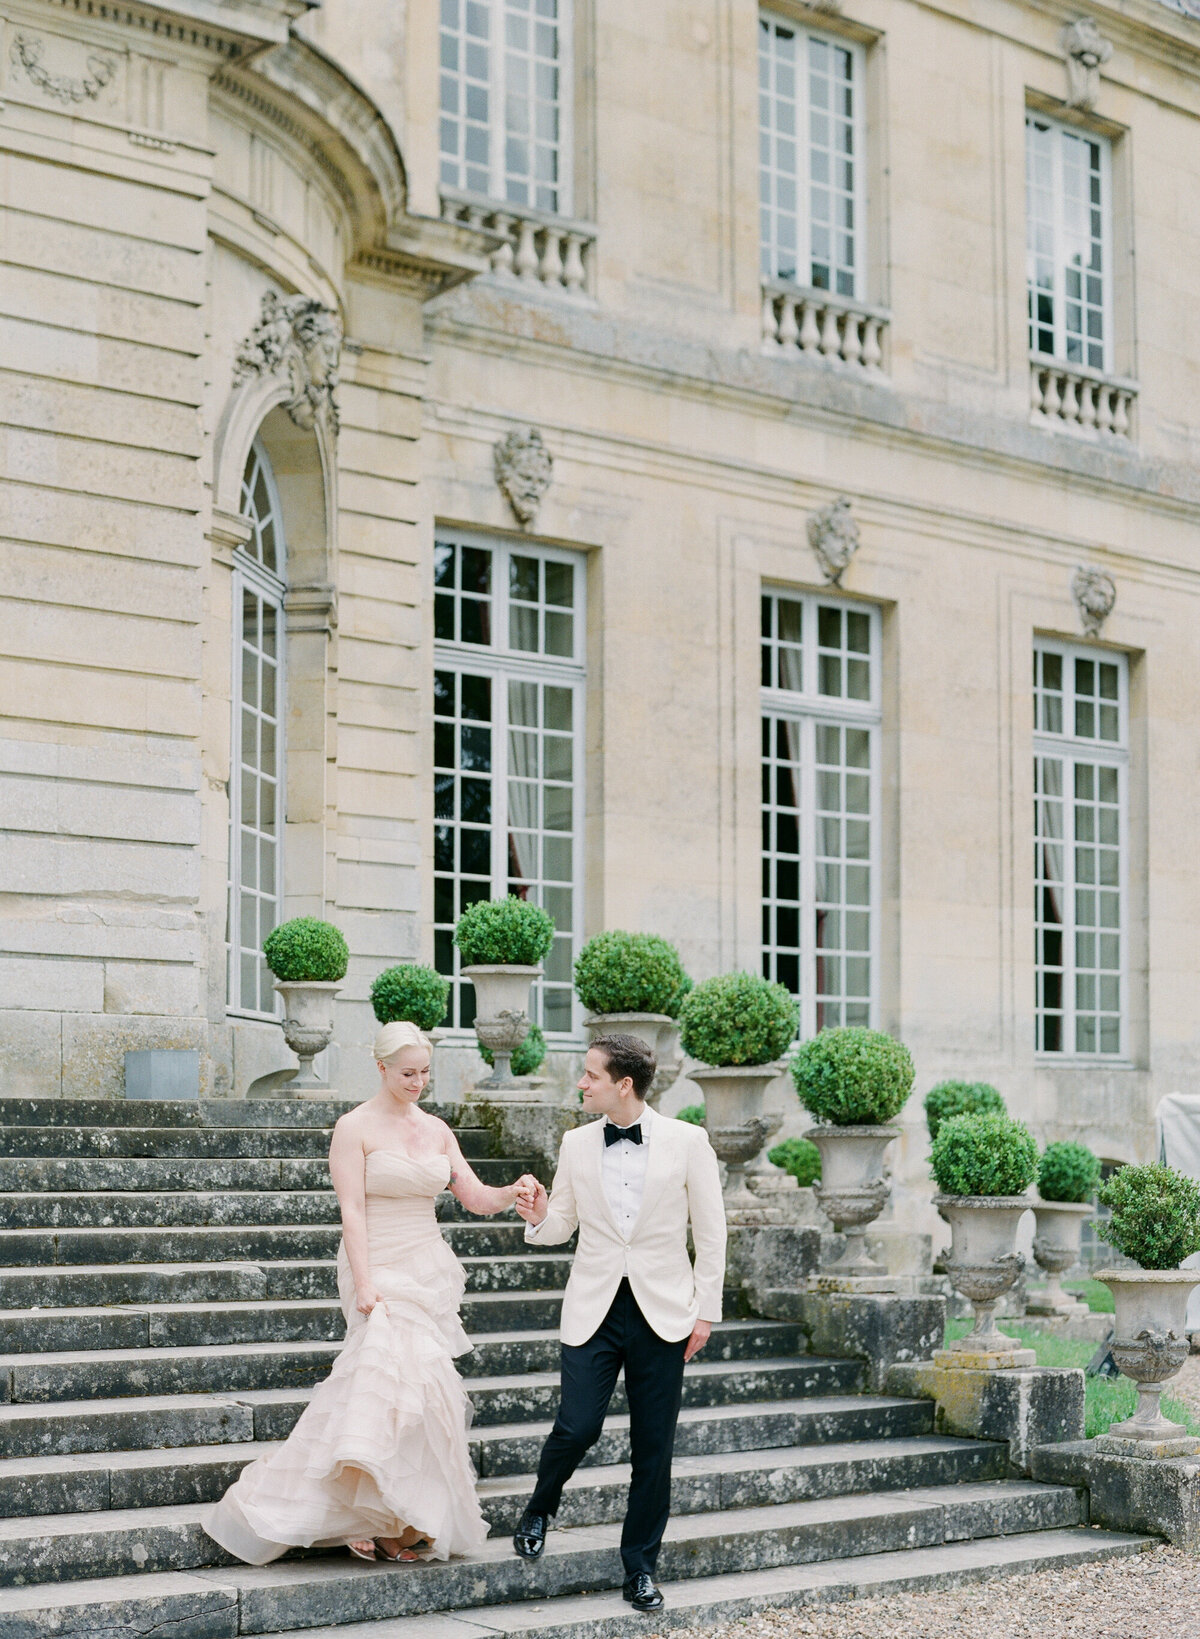 Jennifer Fox Weddings English speaking wedding planning & design agency in France crafting refined and bespoke weddings and celebrations Provence, Paris and destination Laurel-Chris-Chateau-de-Champlatreaux-Molly-Carr-Photography-57